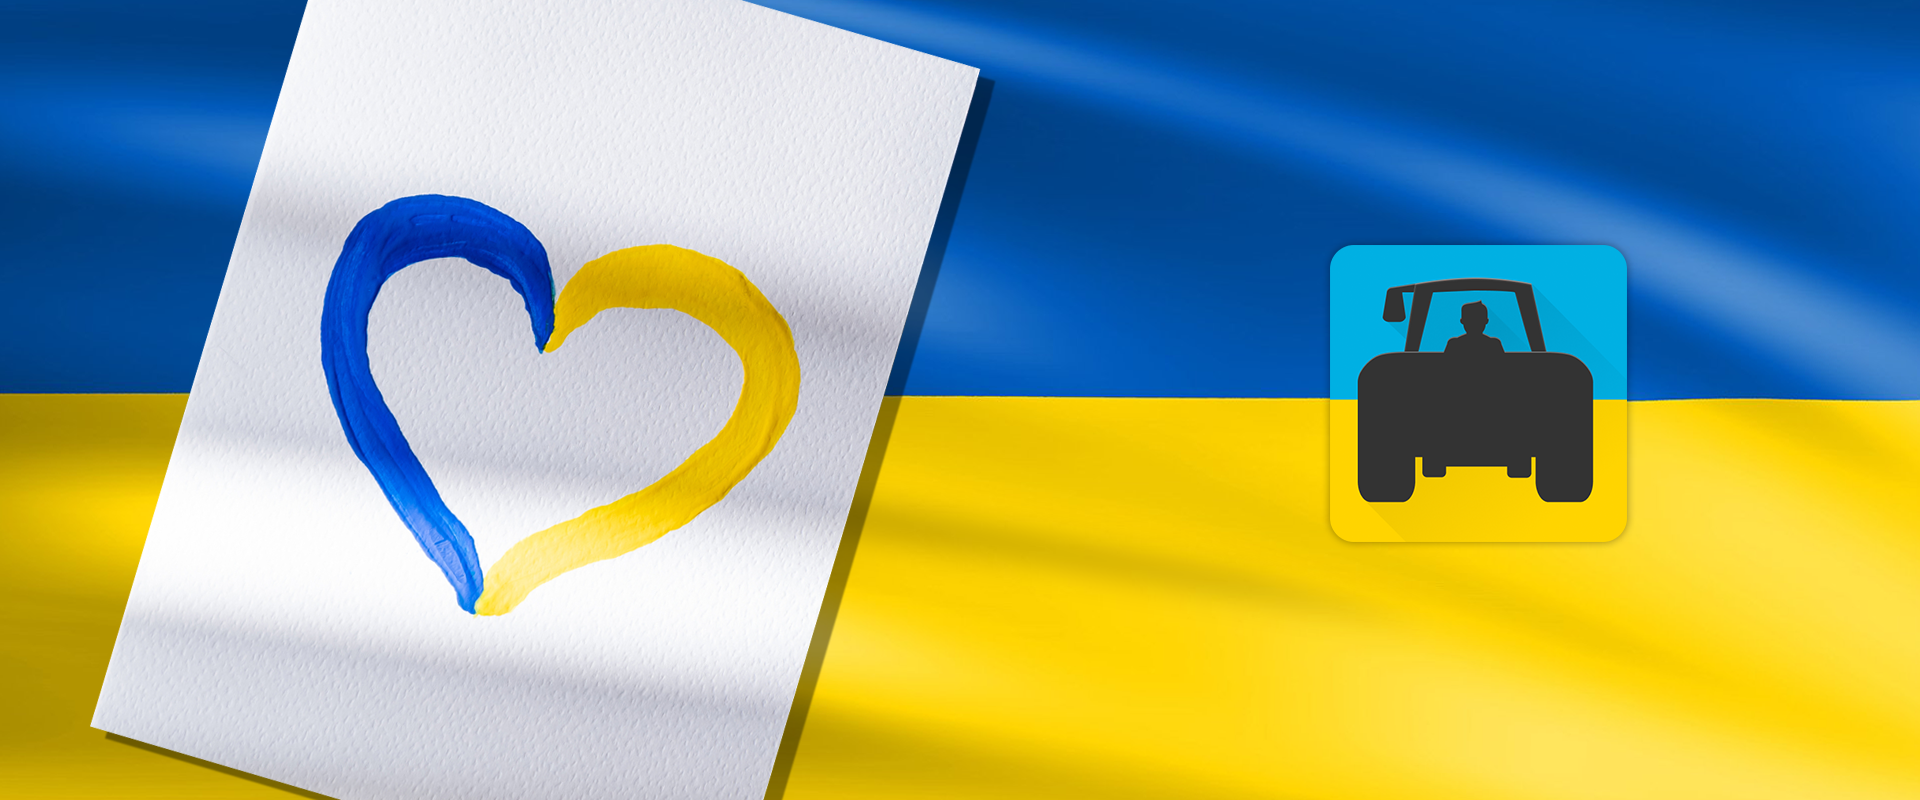 Our Efforts in Ukraine and Company Update